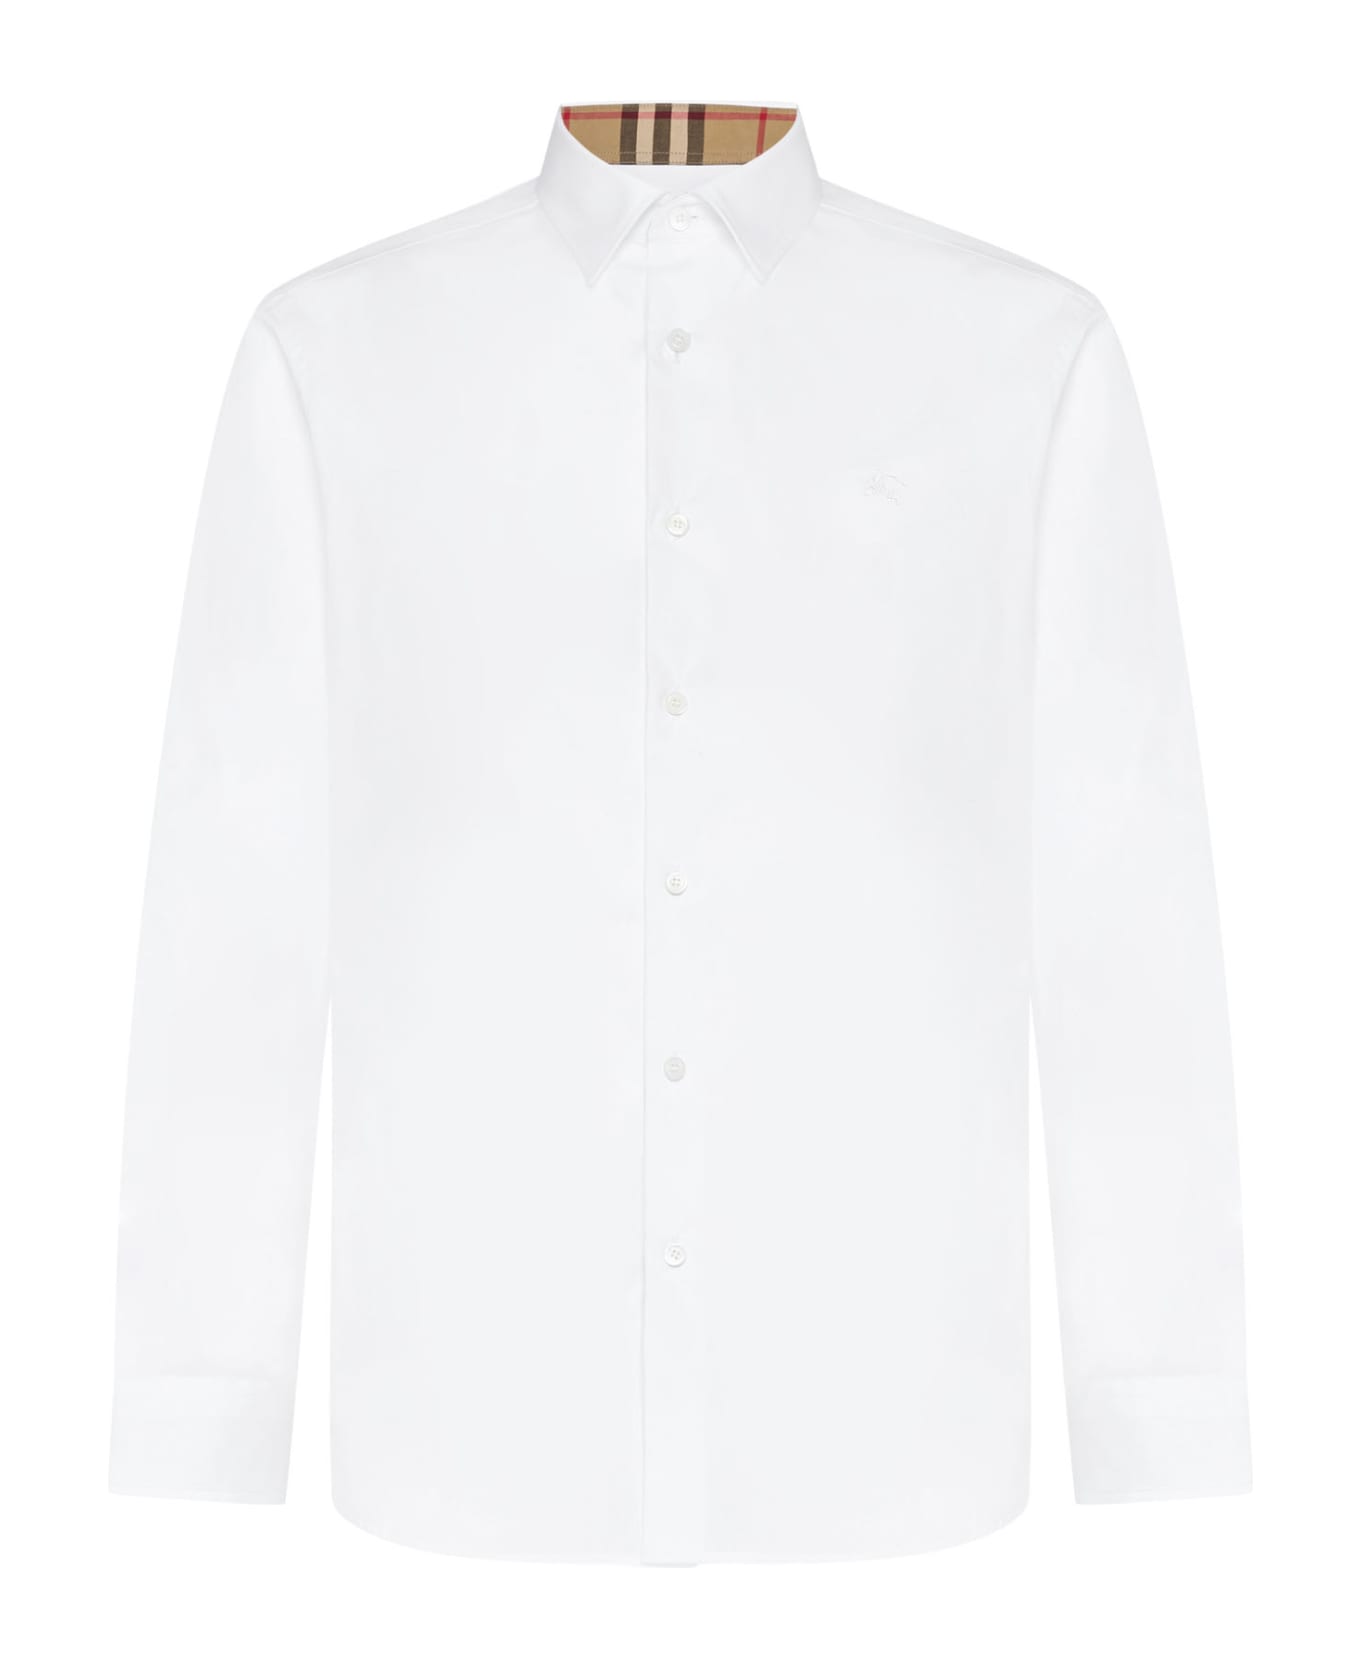 Burberry Sherfield Shirt In White Cotton - White シャツ